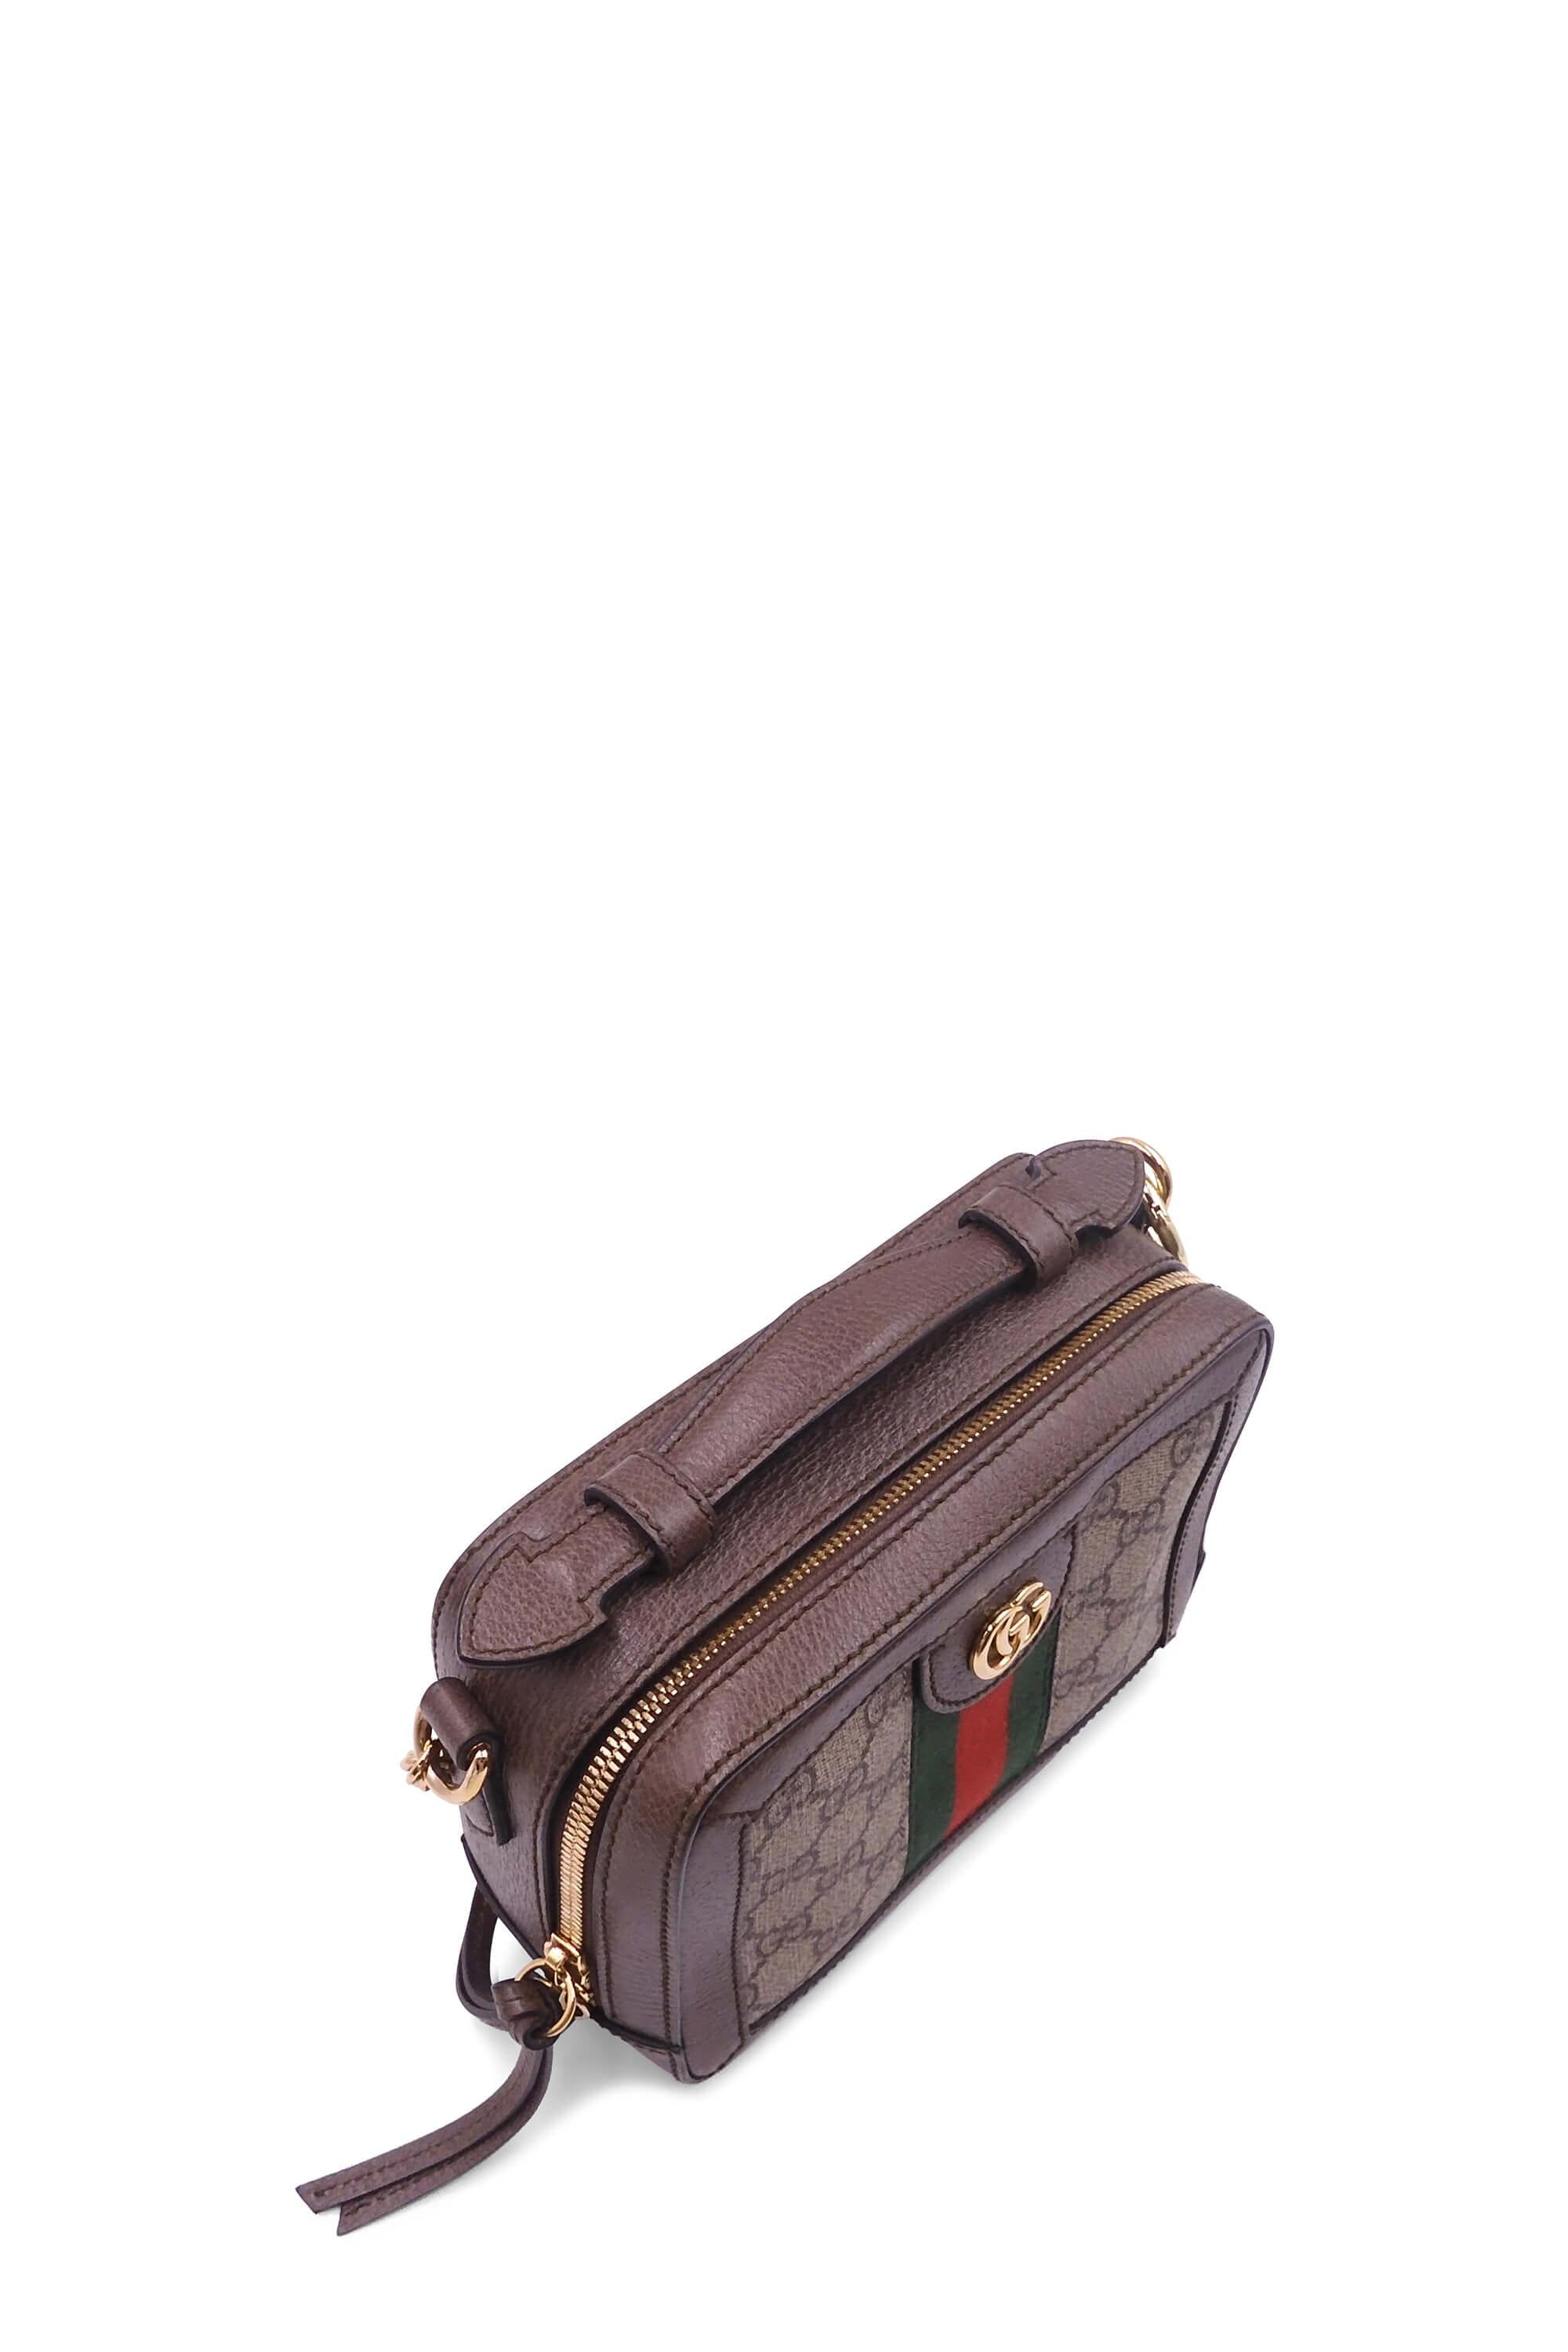 Gucci 517551 Brown Ophidia GG Supreme Pouch/ Clutch Bag - The Attic Place